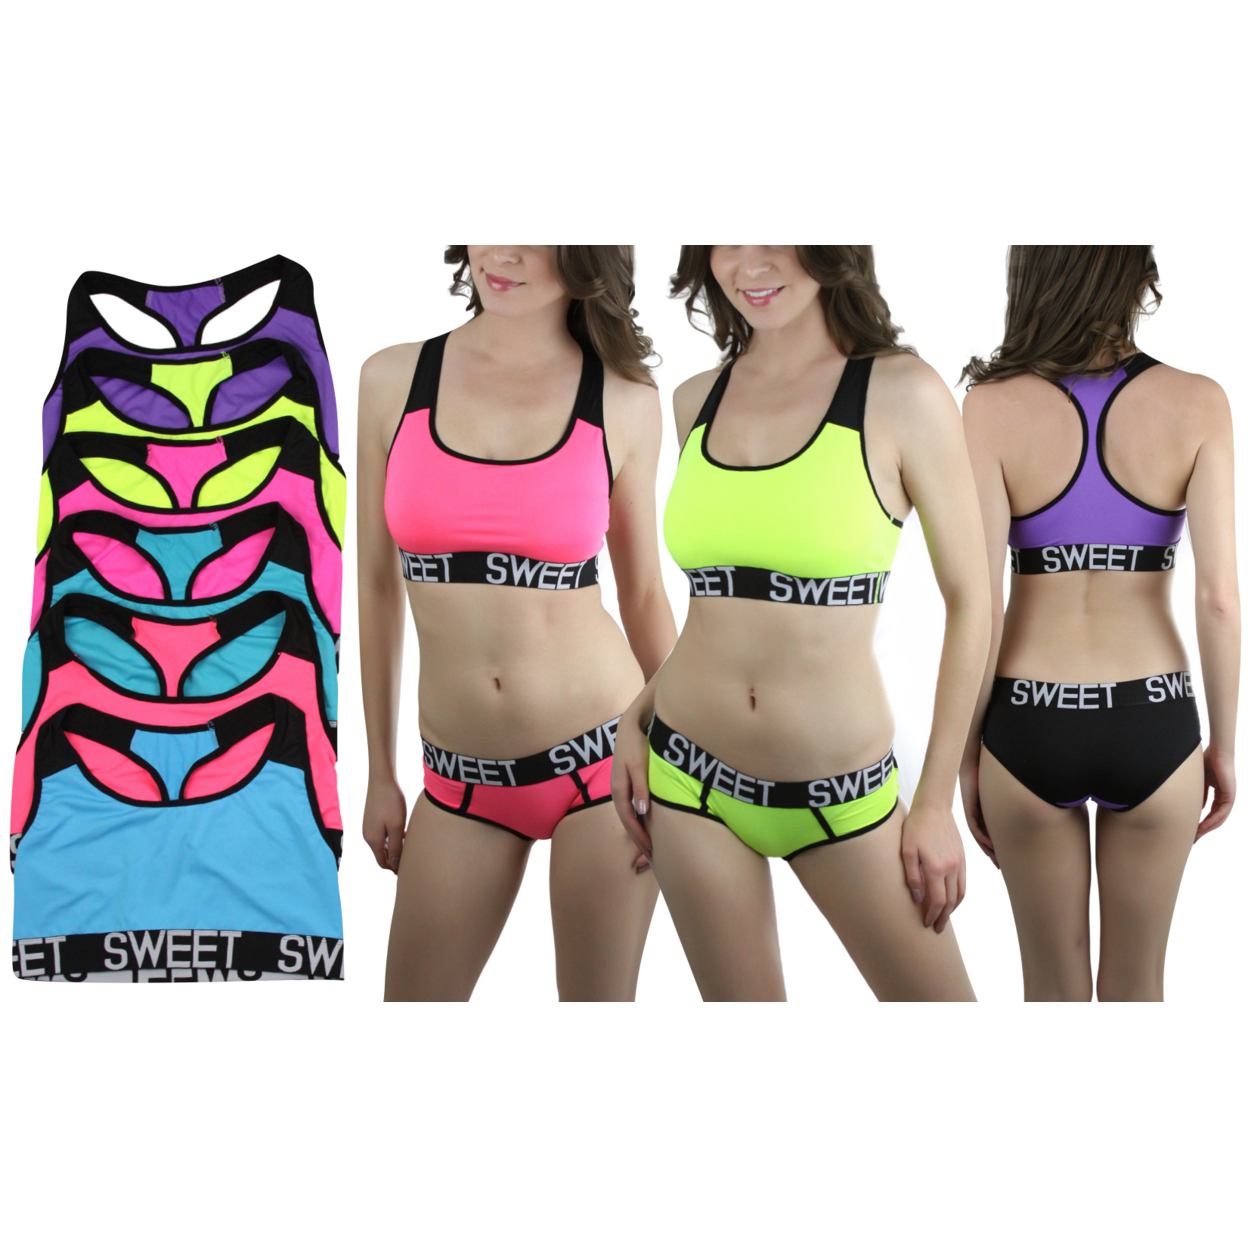 5-Pack Of Sports Bras Or 6-Pack Of Athletic Briefs - Sweet Waistband - S/M, Bras